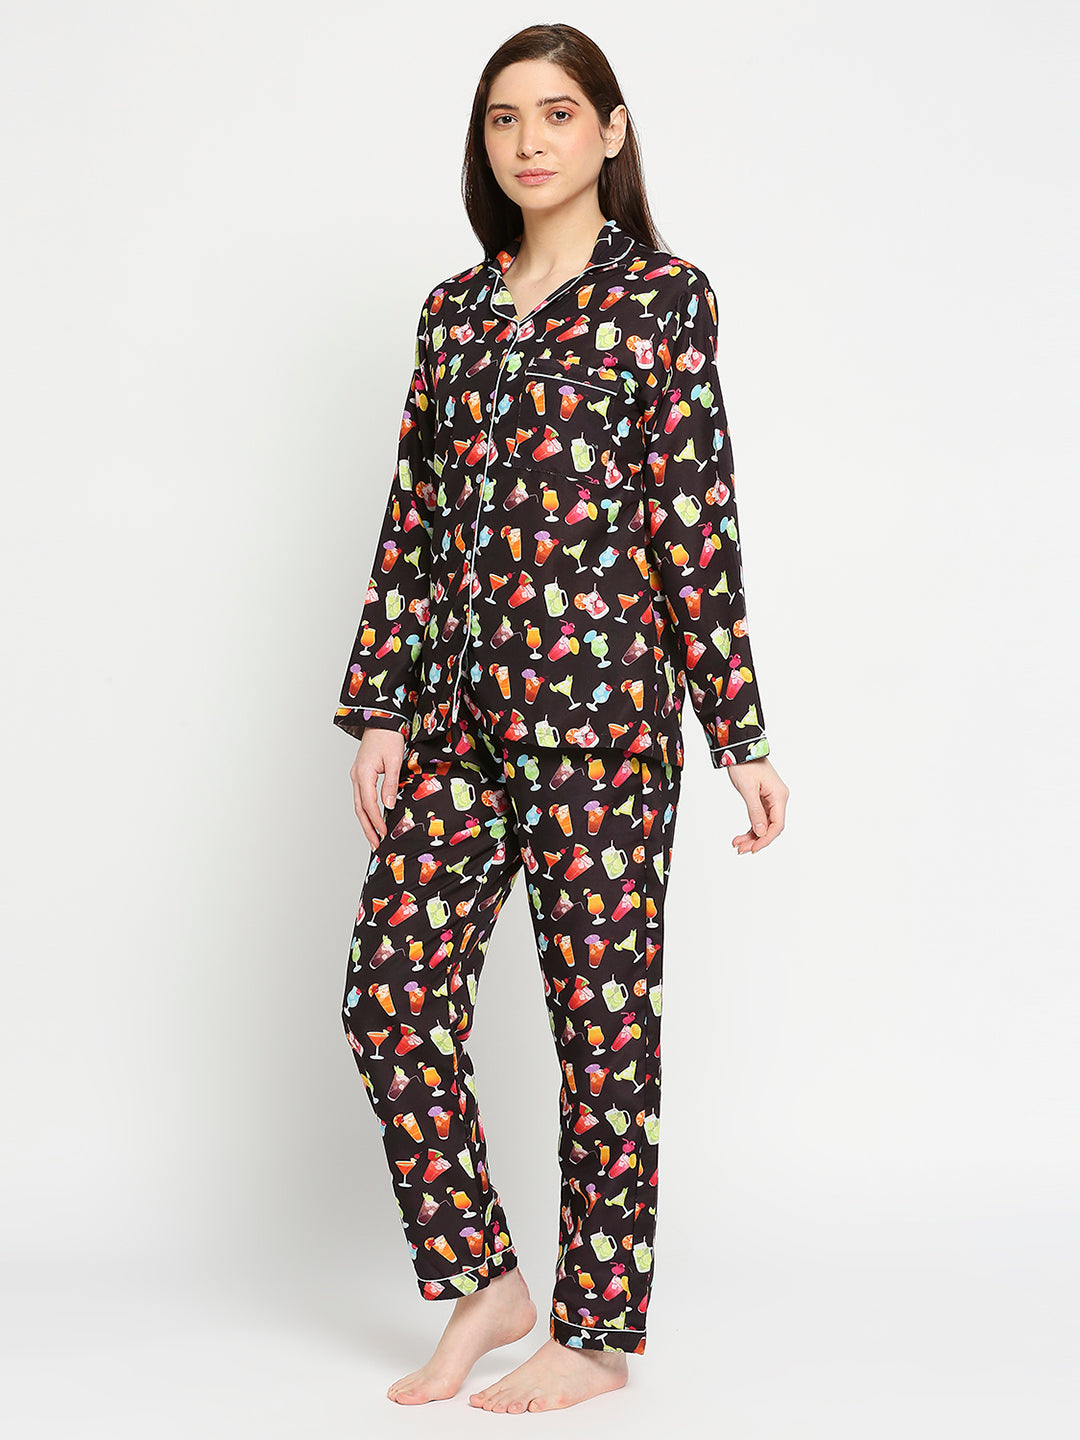 Cocktail Party Button Down Pj Set - Cotton Rayon Pj Set with Notched Collar